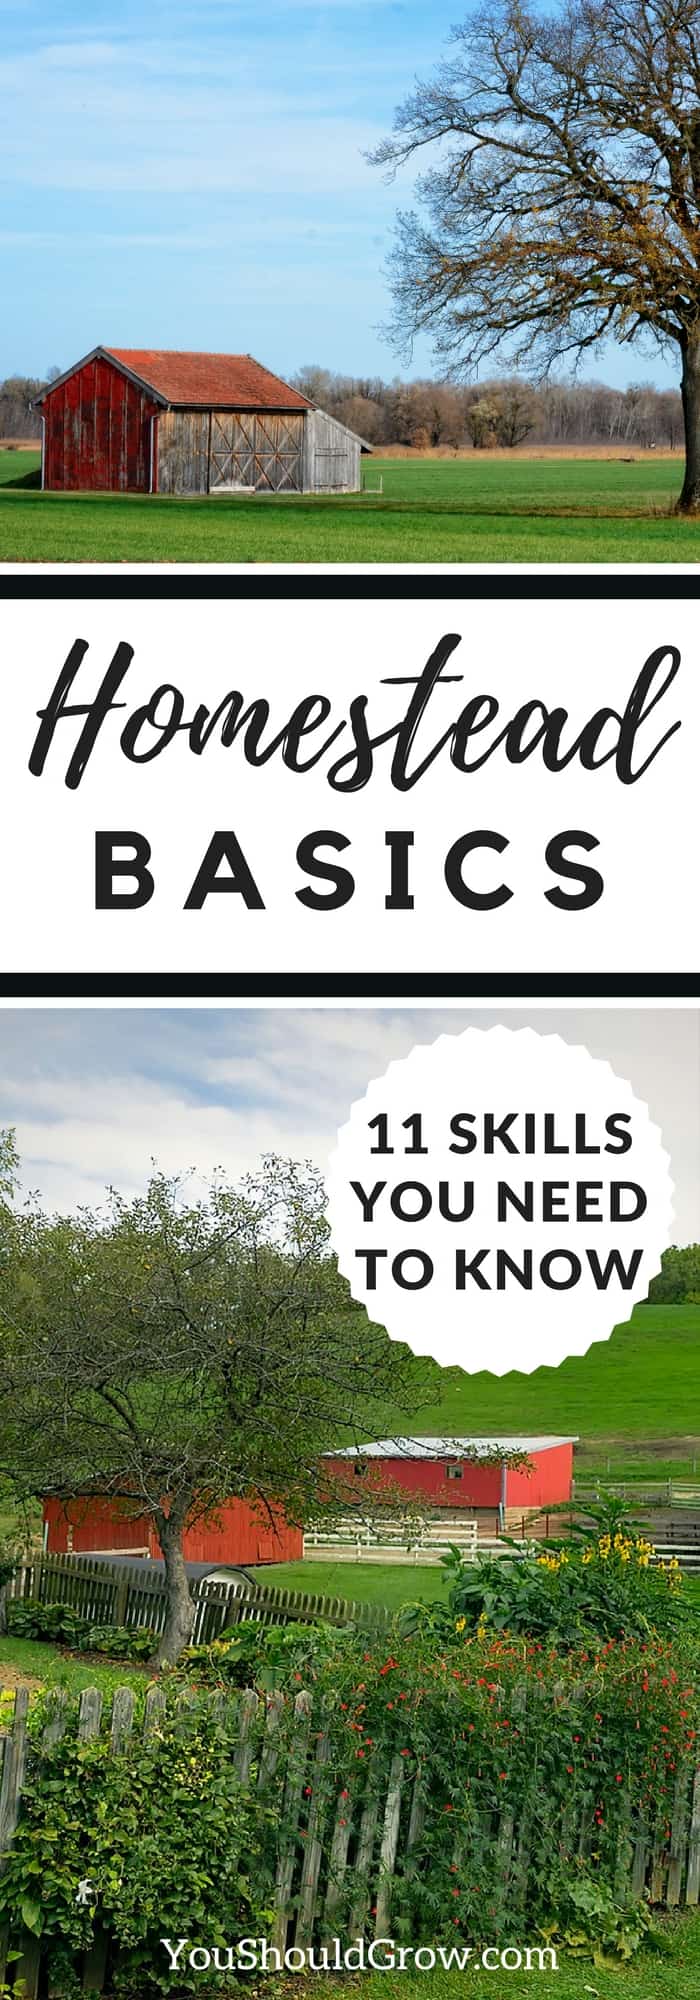 11 Homestead basics you need to know!